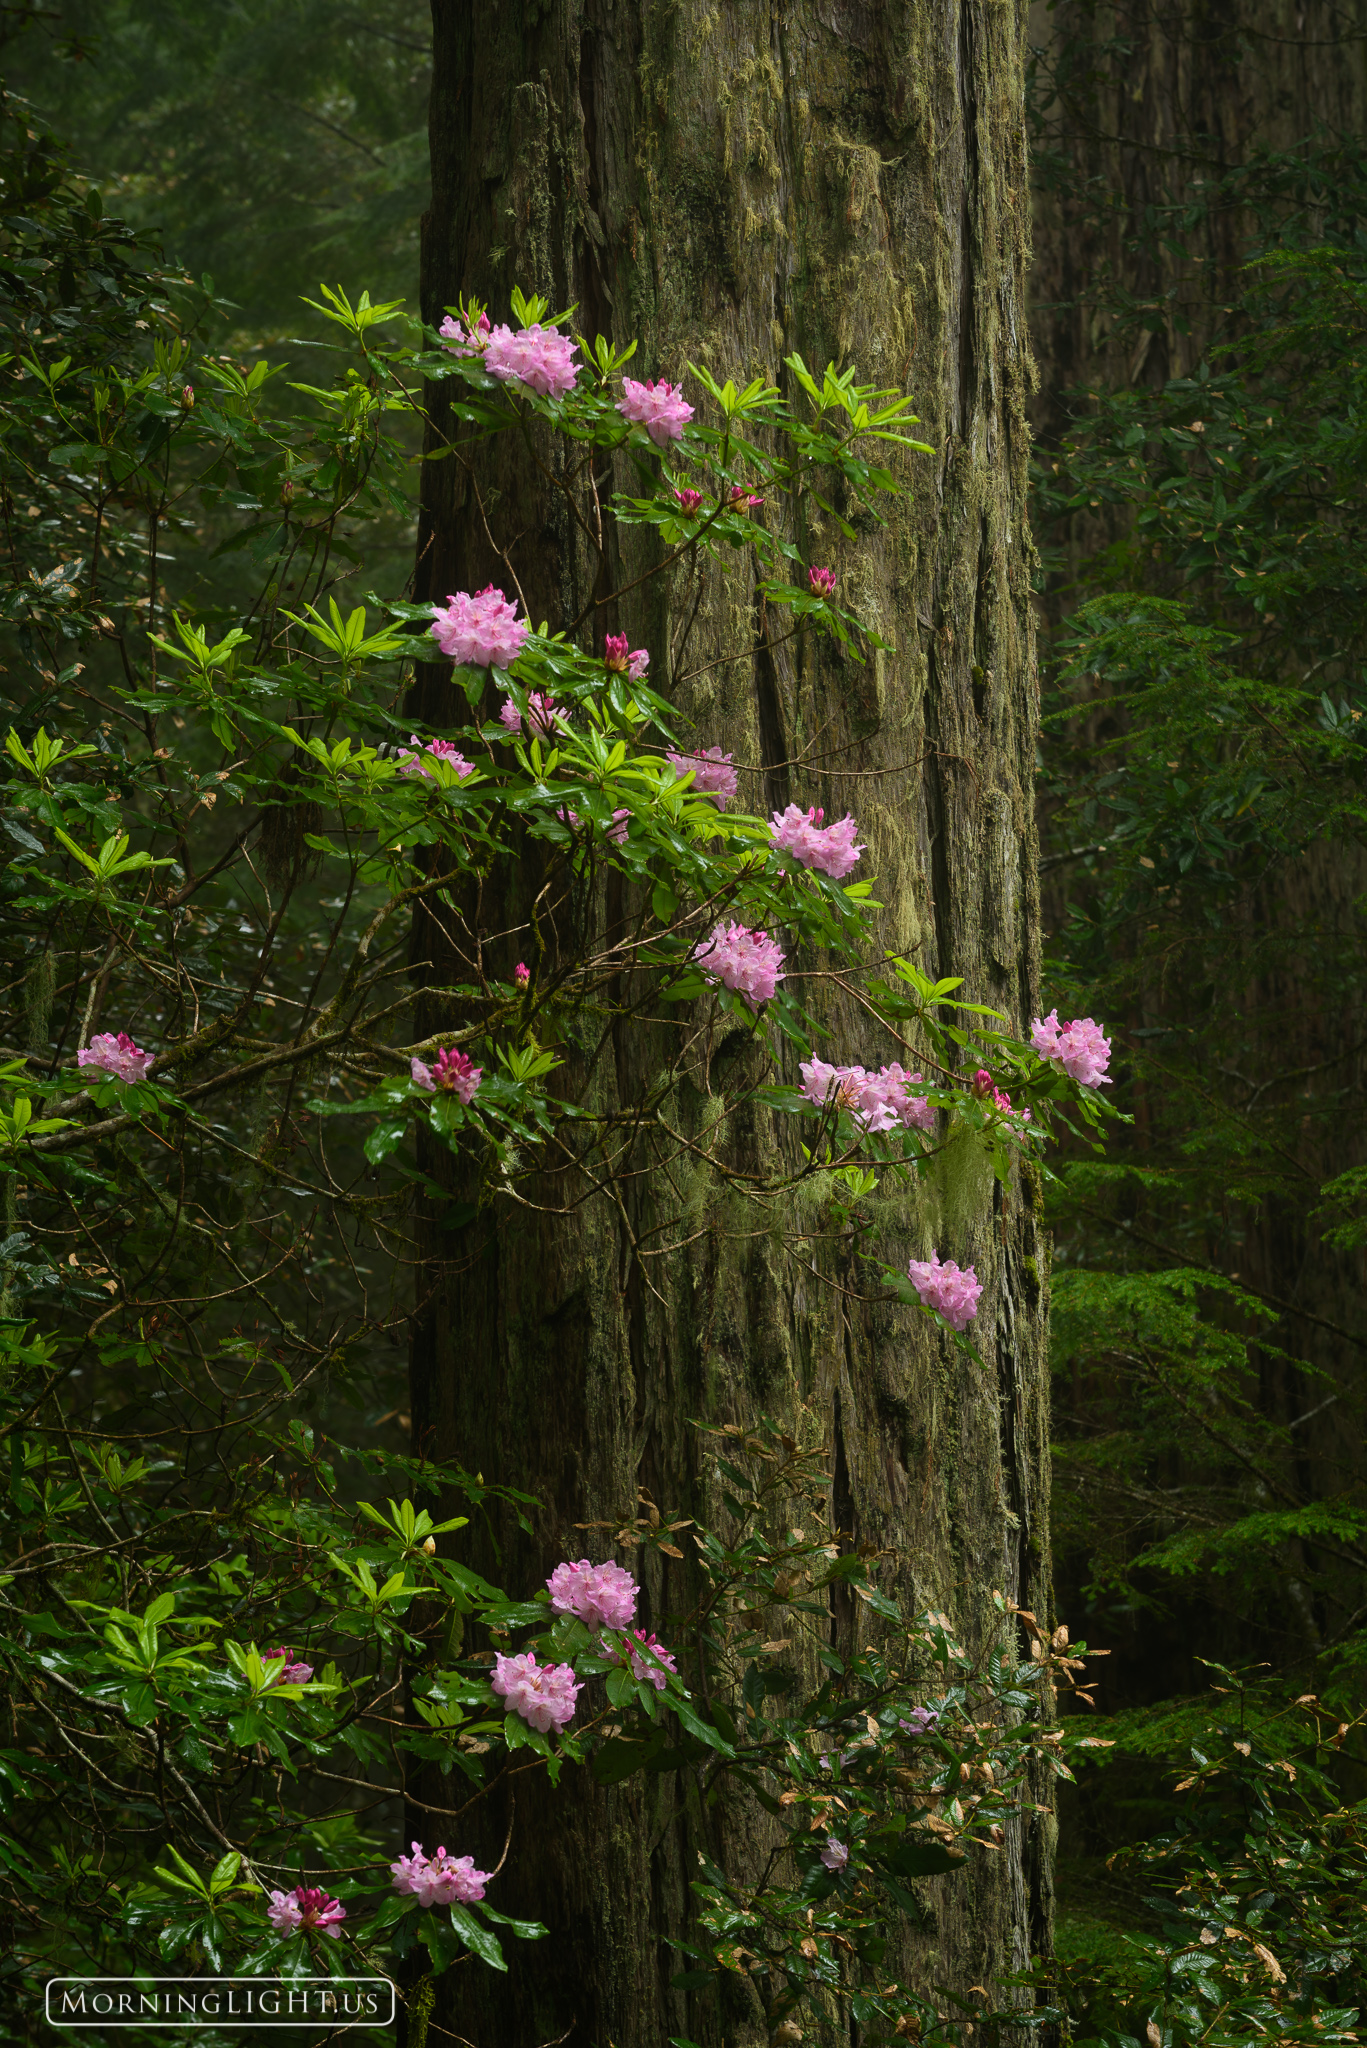 The rhododendrons in the midst of the redwood forests are an amazing sight. These giant blossoms bring a smile to the face of...